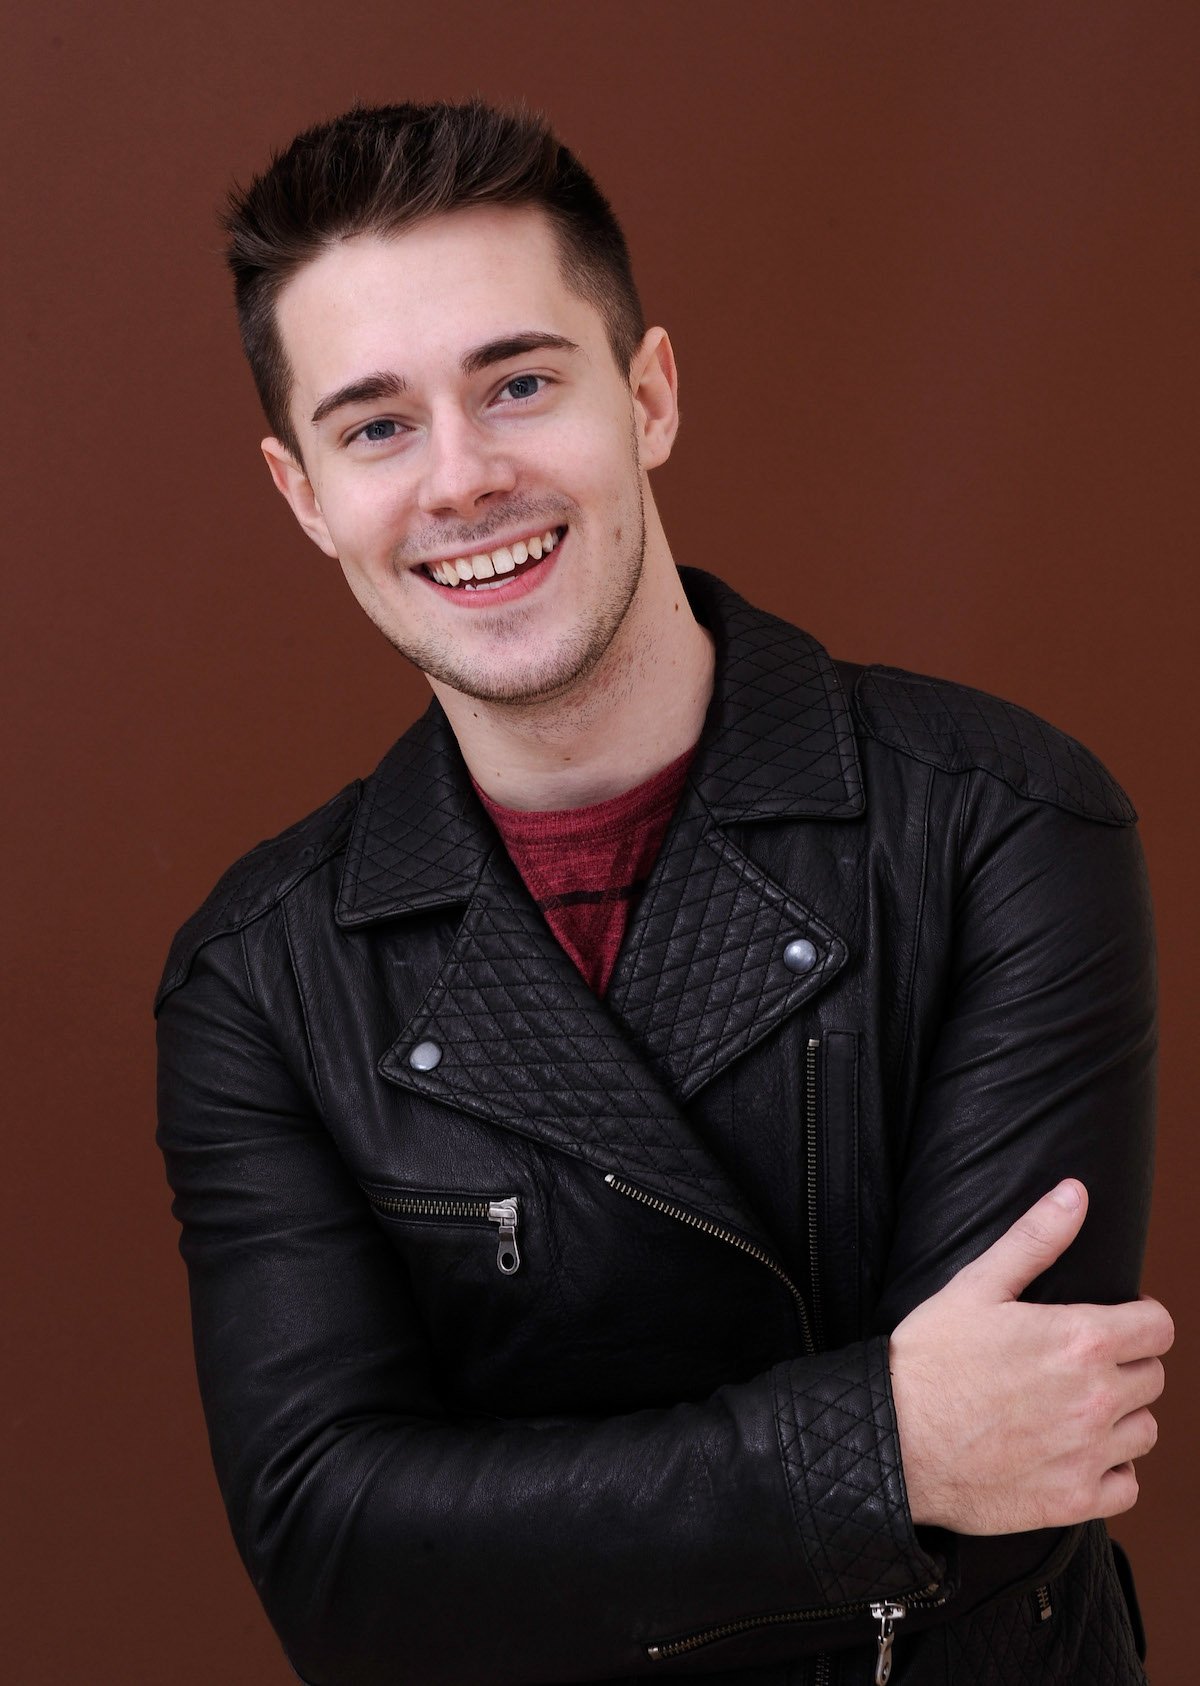 Chris Crocker in a black leather jacket, smiling and posing for the camera.